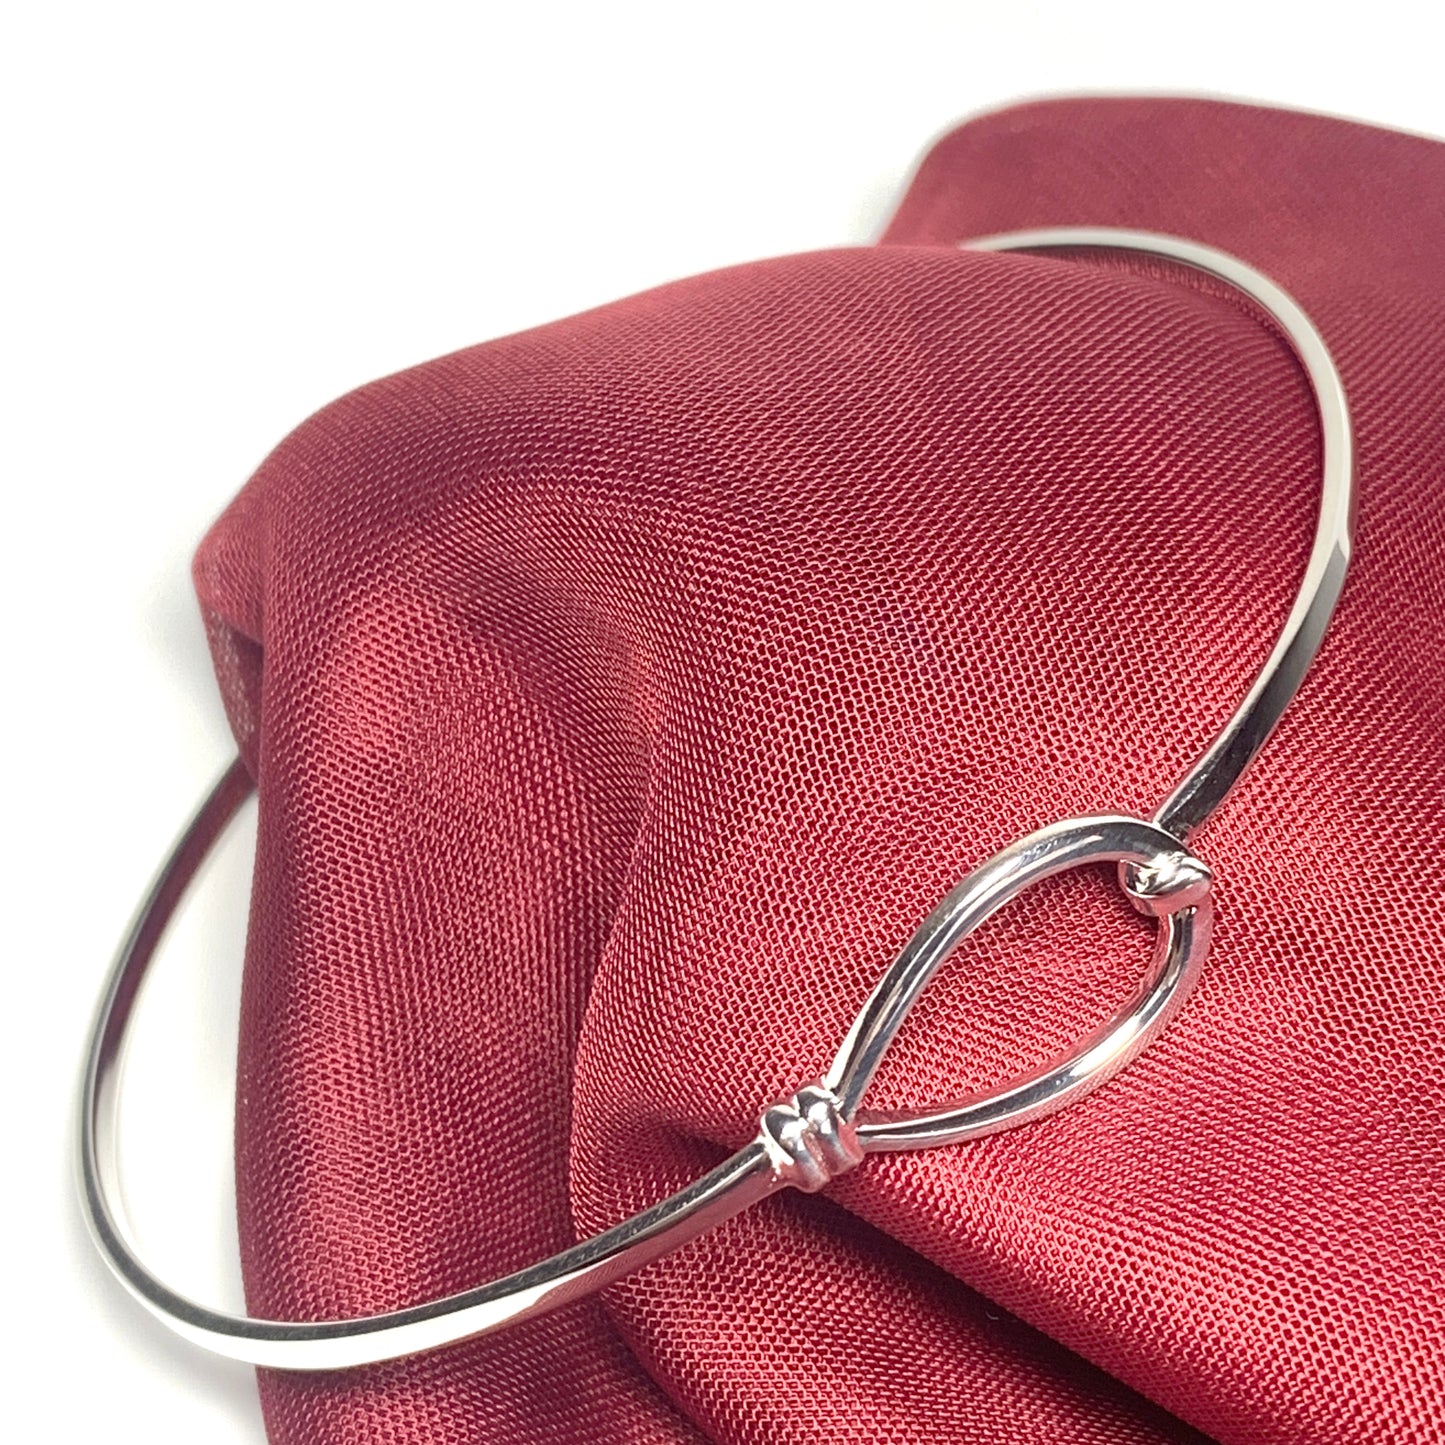 Ladies Sterling Silver Hooked Bangle